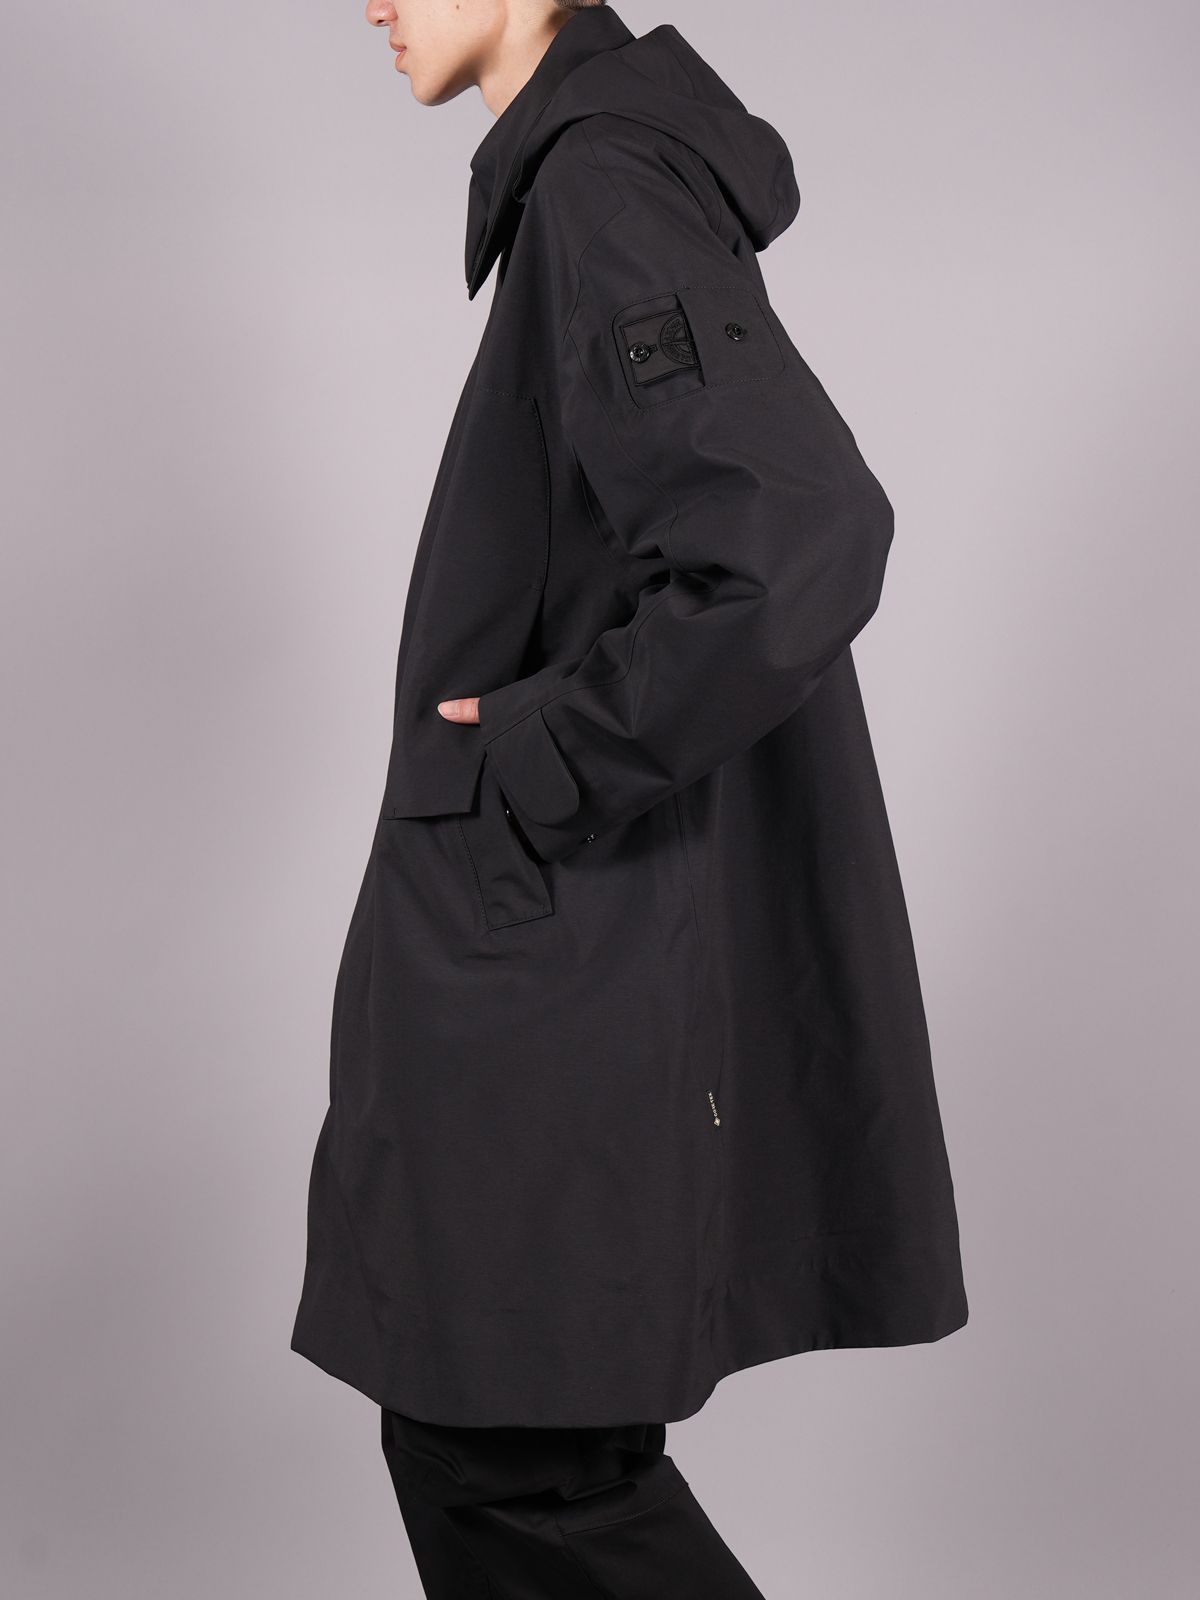 STONE ISLAND SHADOW PROJECT - 【ラスト1点】LONG TRENCH ...